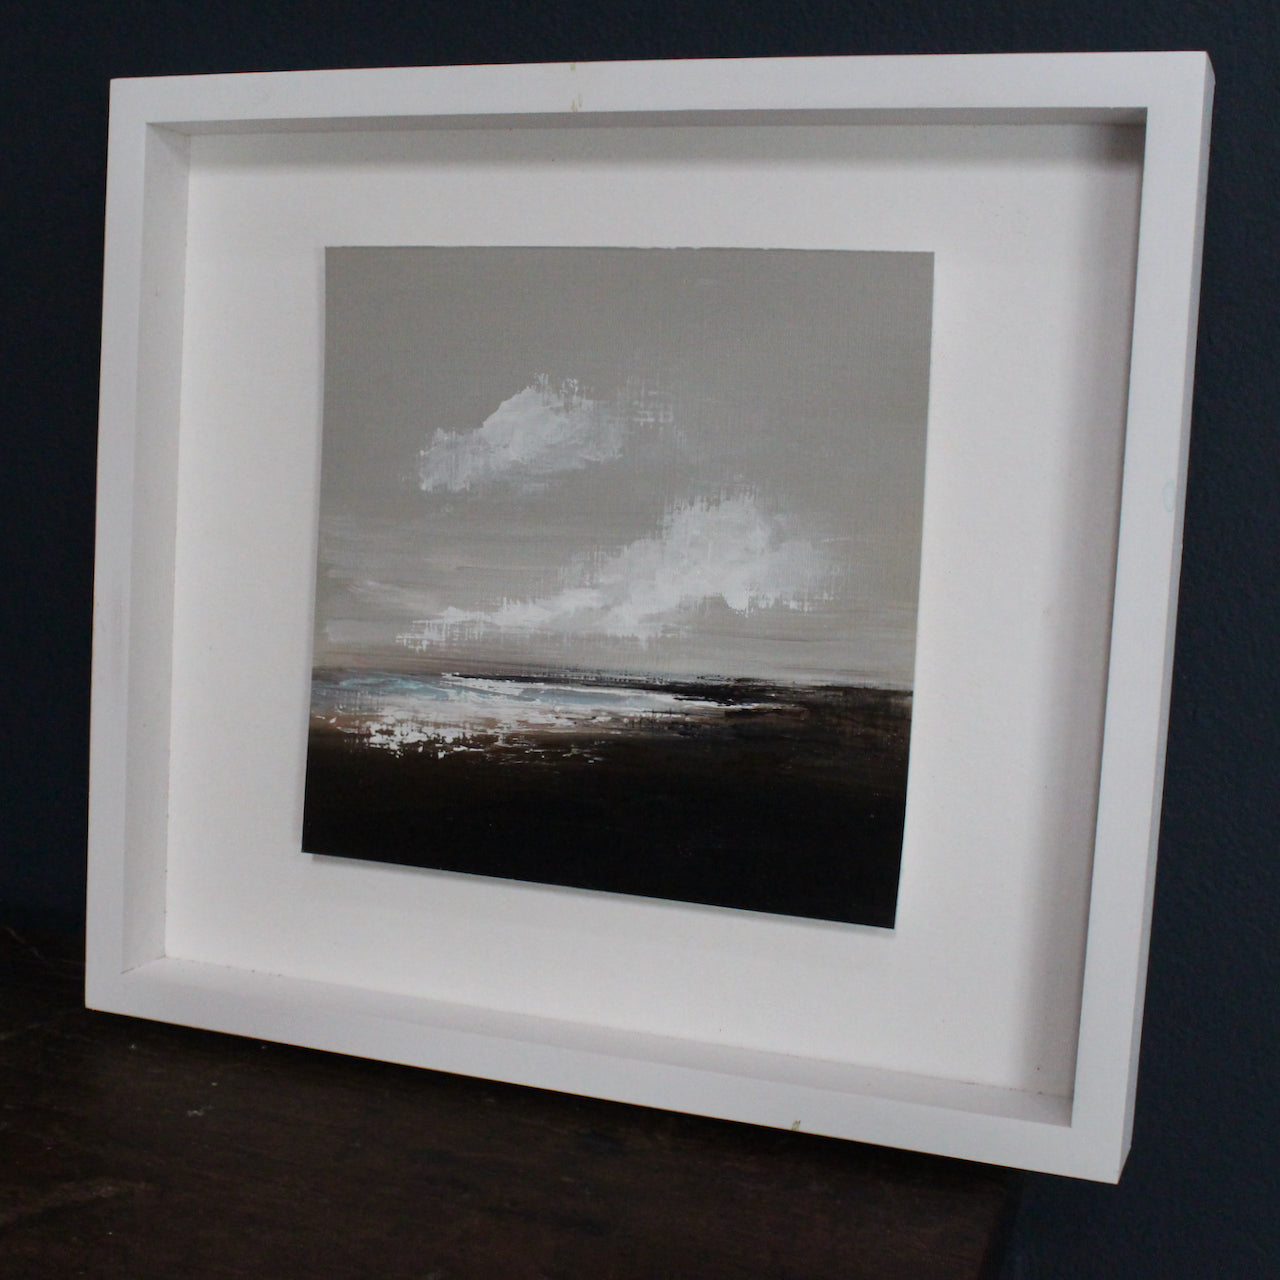 Cornish artist Nicola Mosley seascape of brown and black tones with ocean and white clouds